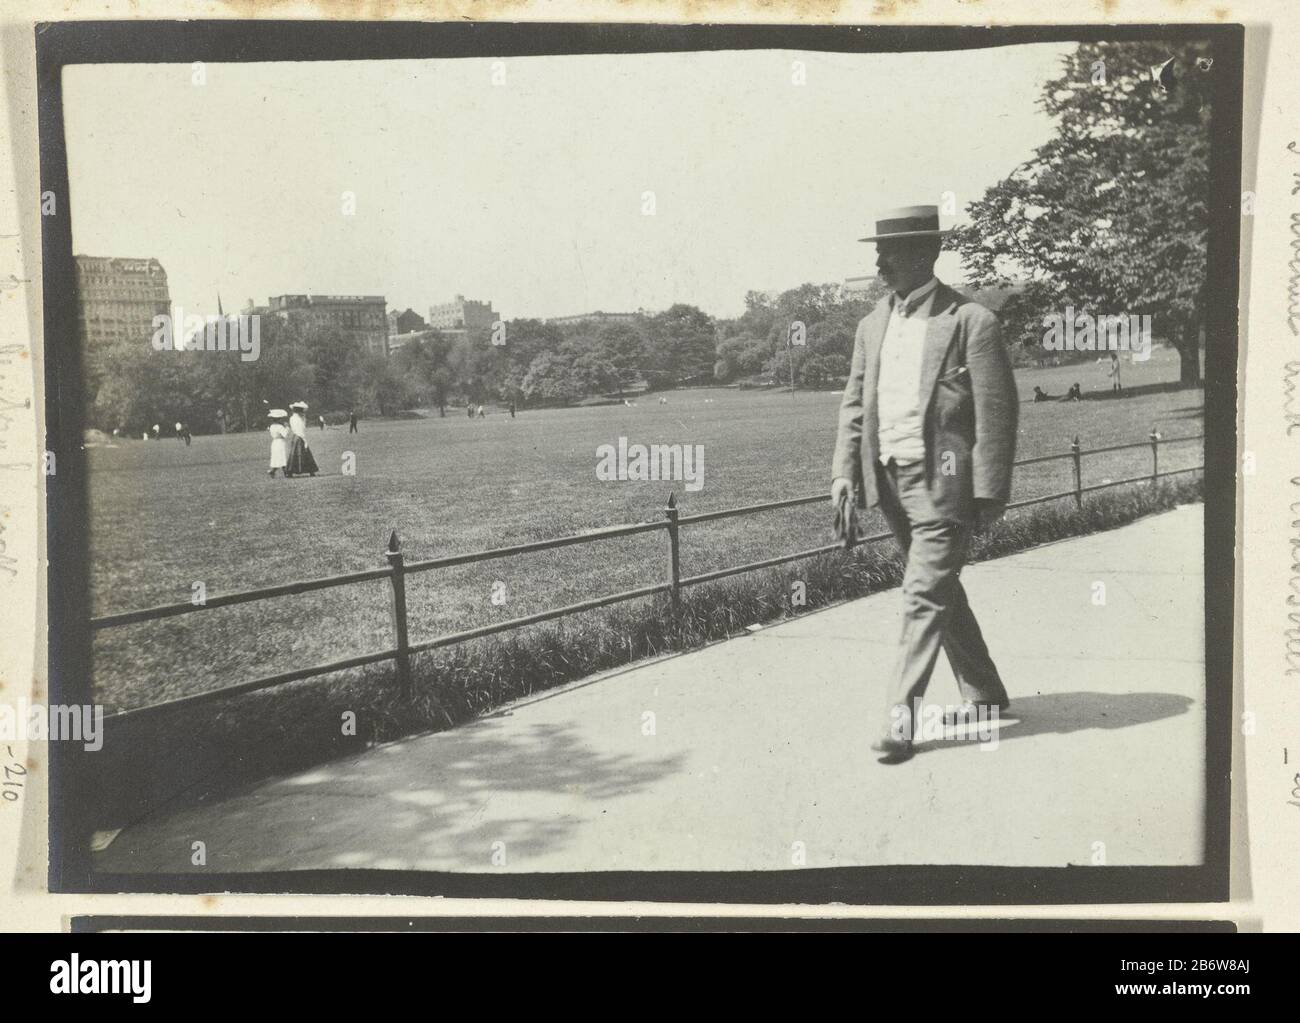 In the Central Park (titel op object) presumably a companion of Dolph Kessler in Central Park New York. Part of the photo Dolph Kessler with recordings he made during his stay in England, and in a world which he, as secretary of Henri Deterding (Director Royal Dutch) took to the Dutch East Indies, Japan, China and the United States, between 1906 and 1908. Manufacturer : photographer: Geldolph Adriaan Kessler Place manufacture: New York Date: May 1908 Physical features: gelatin silver print on album leaf material: paper carton Technique: gelatin silver print dimensions: photo: h 100 mm × W 74 m Stock Photo